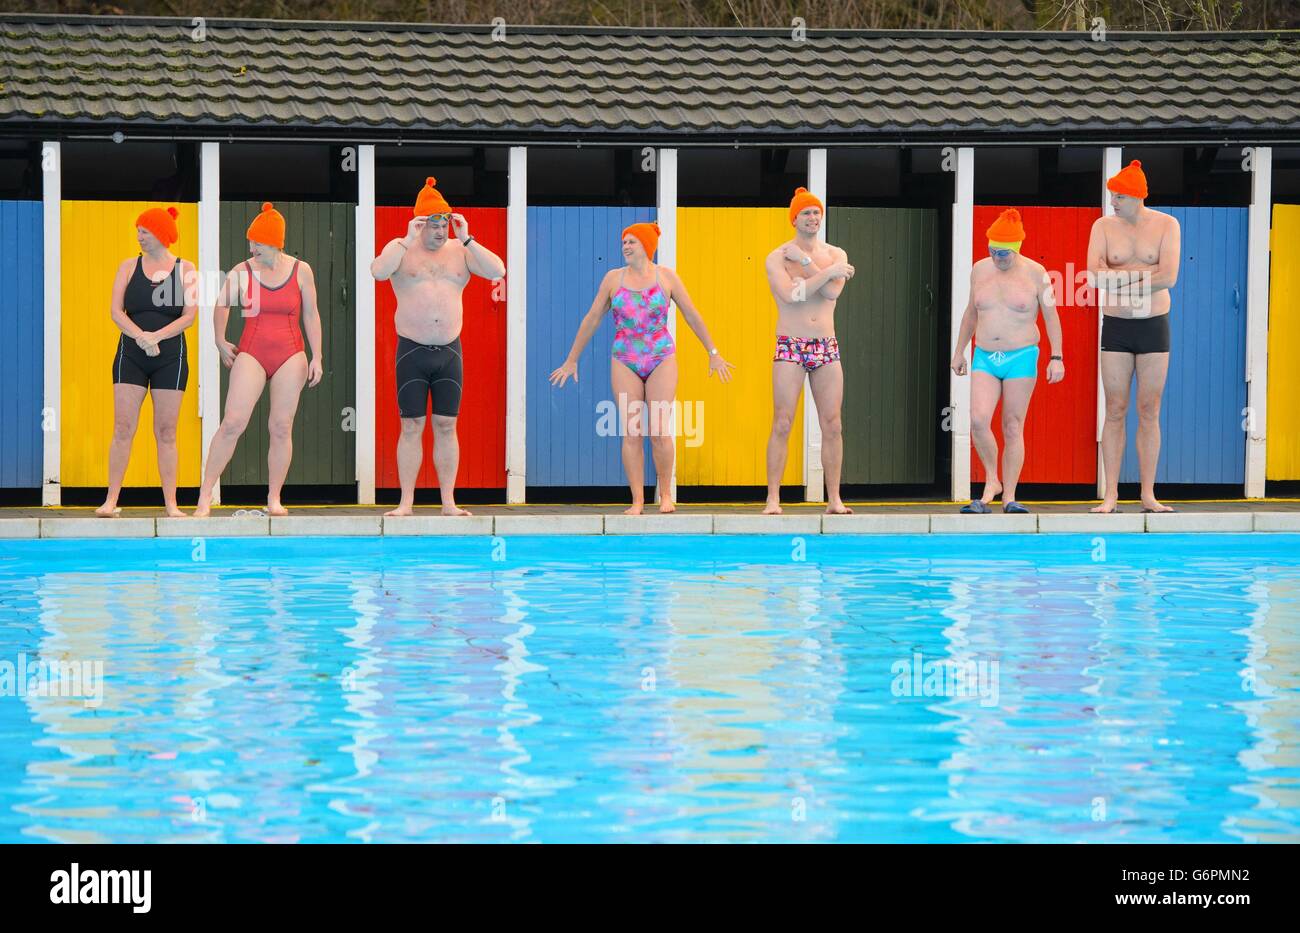 Cold weather swimmers prepare to take a swim at Tooting Bec Lido, in Tooting, south London, wearing orange bobble hats in support of homeless charity St Mungo's annual fundraising event Woolly Hat Day, which takes place on January 31 to raise awareness of homelessness in winter. Stock Photo